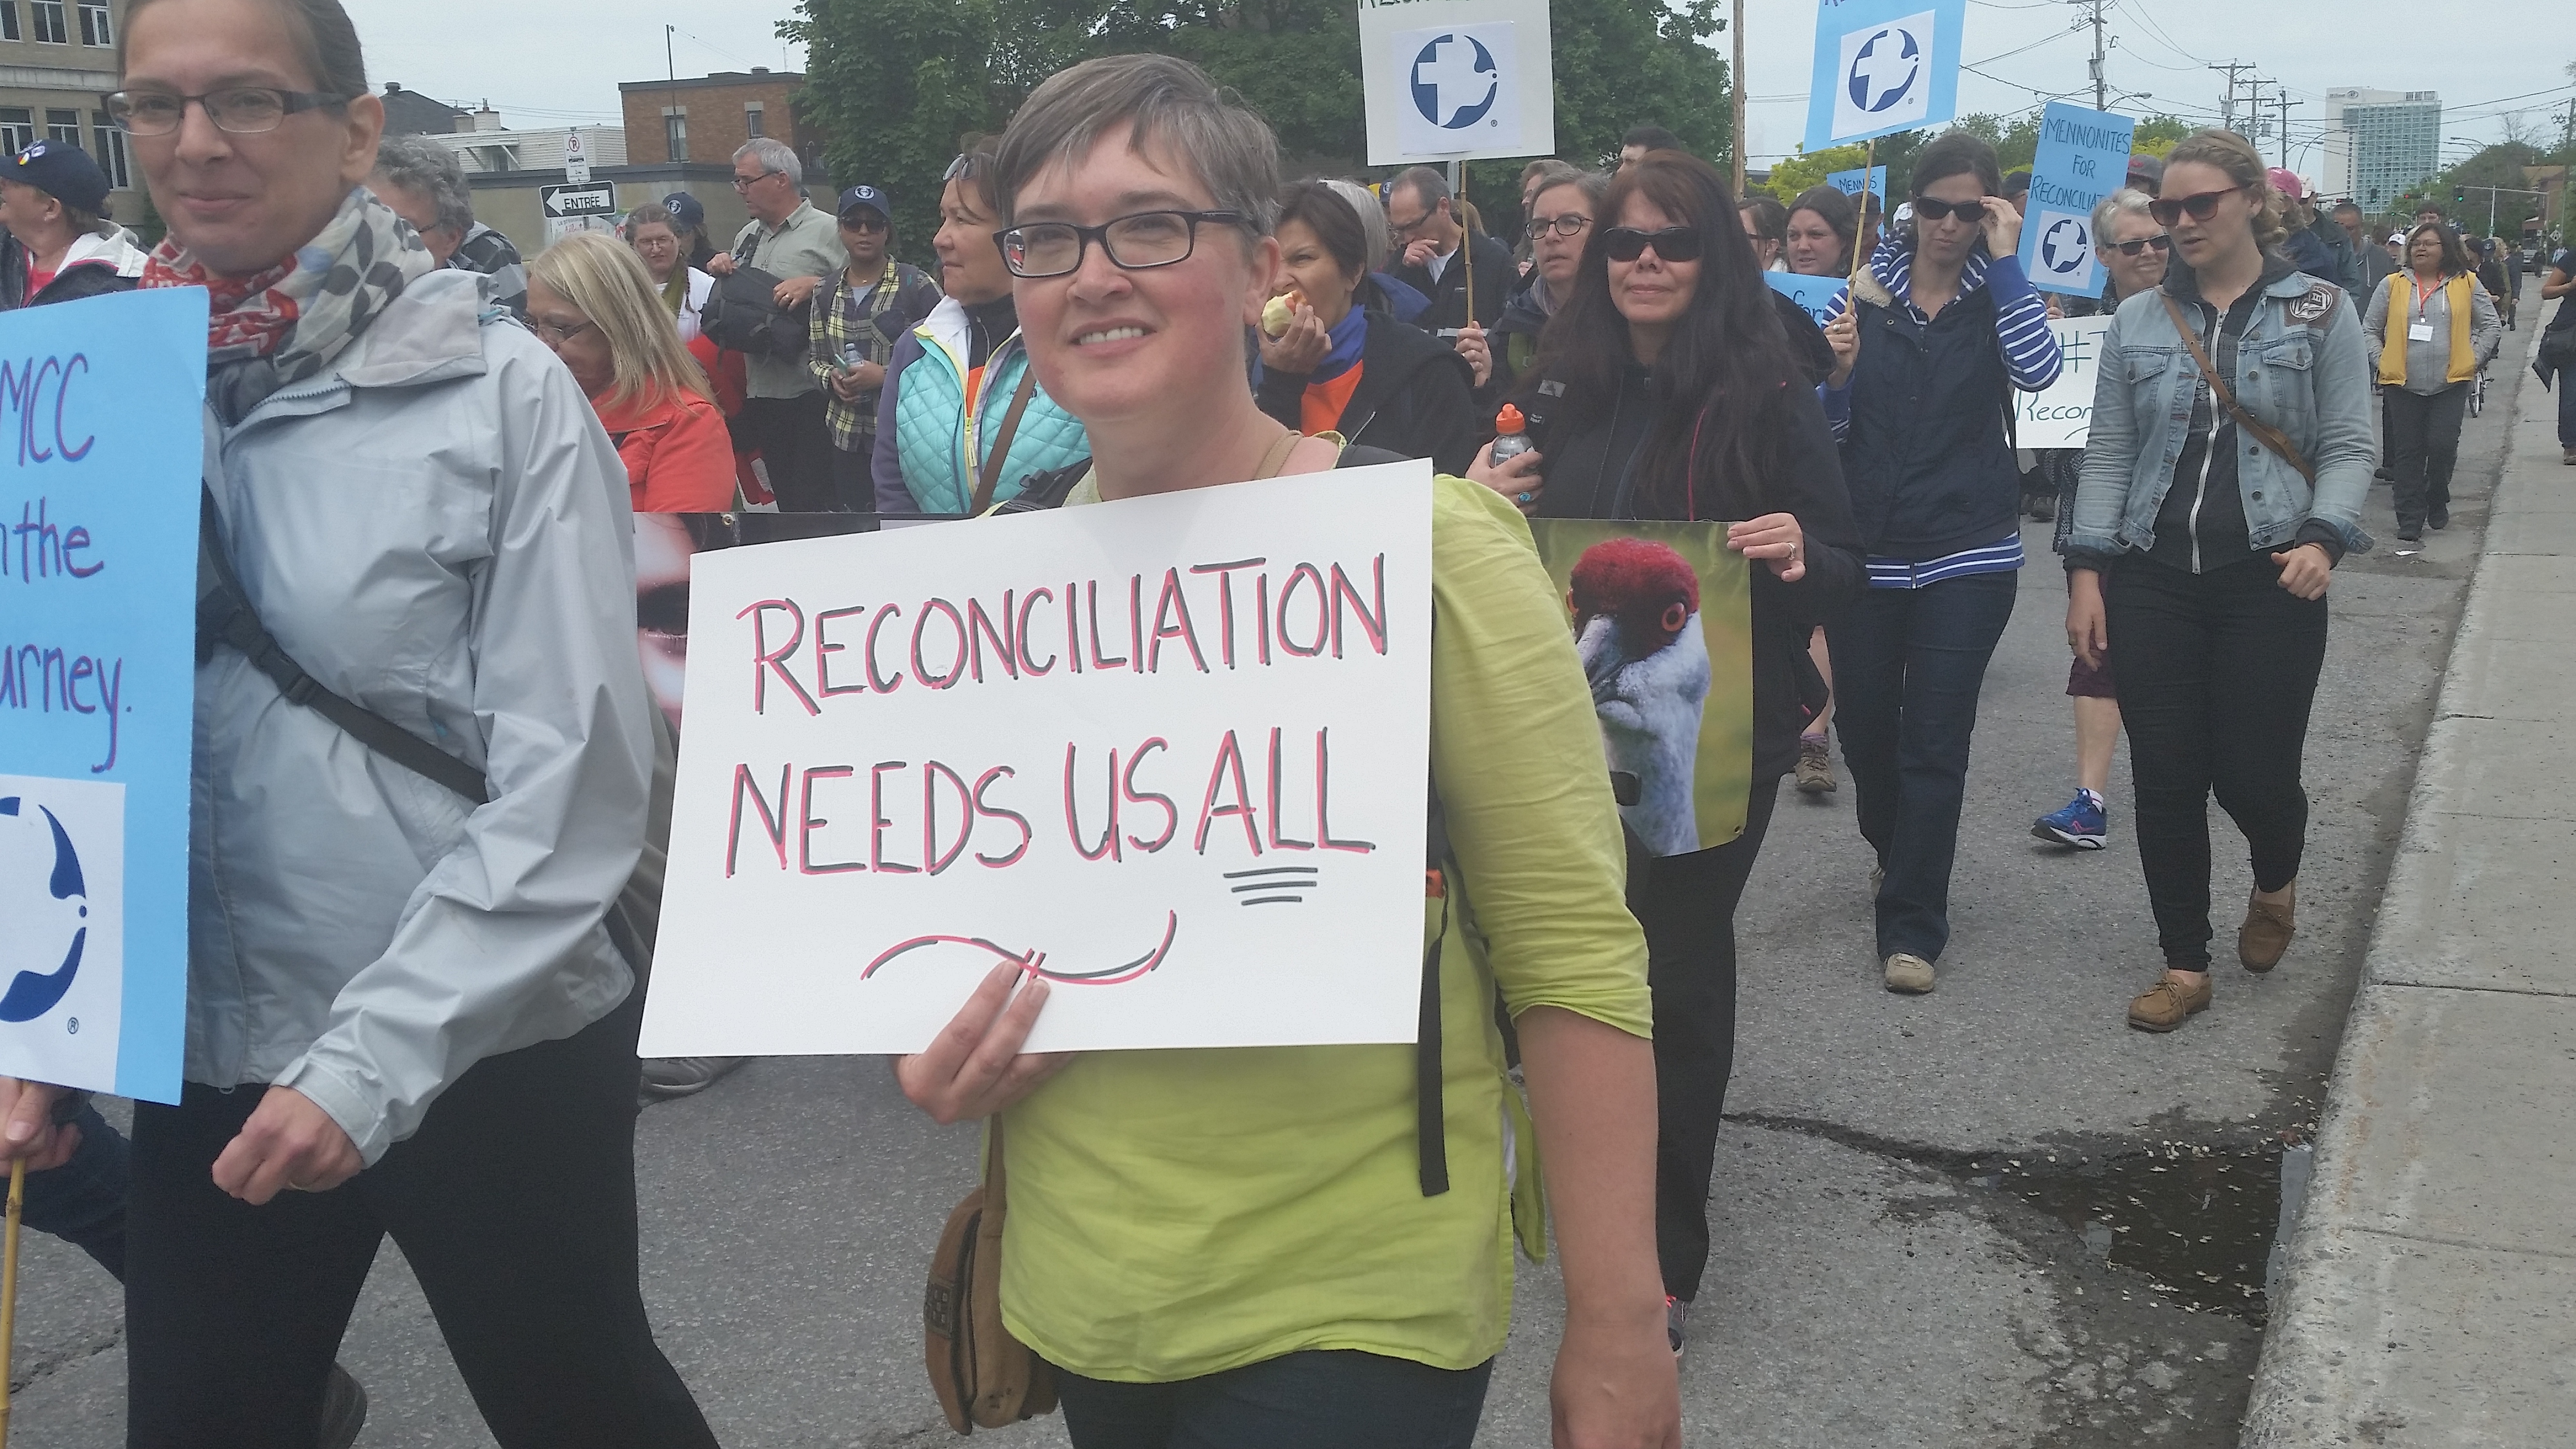 Participant of the Walk for Reconciliation